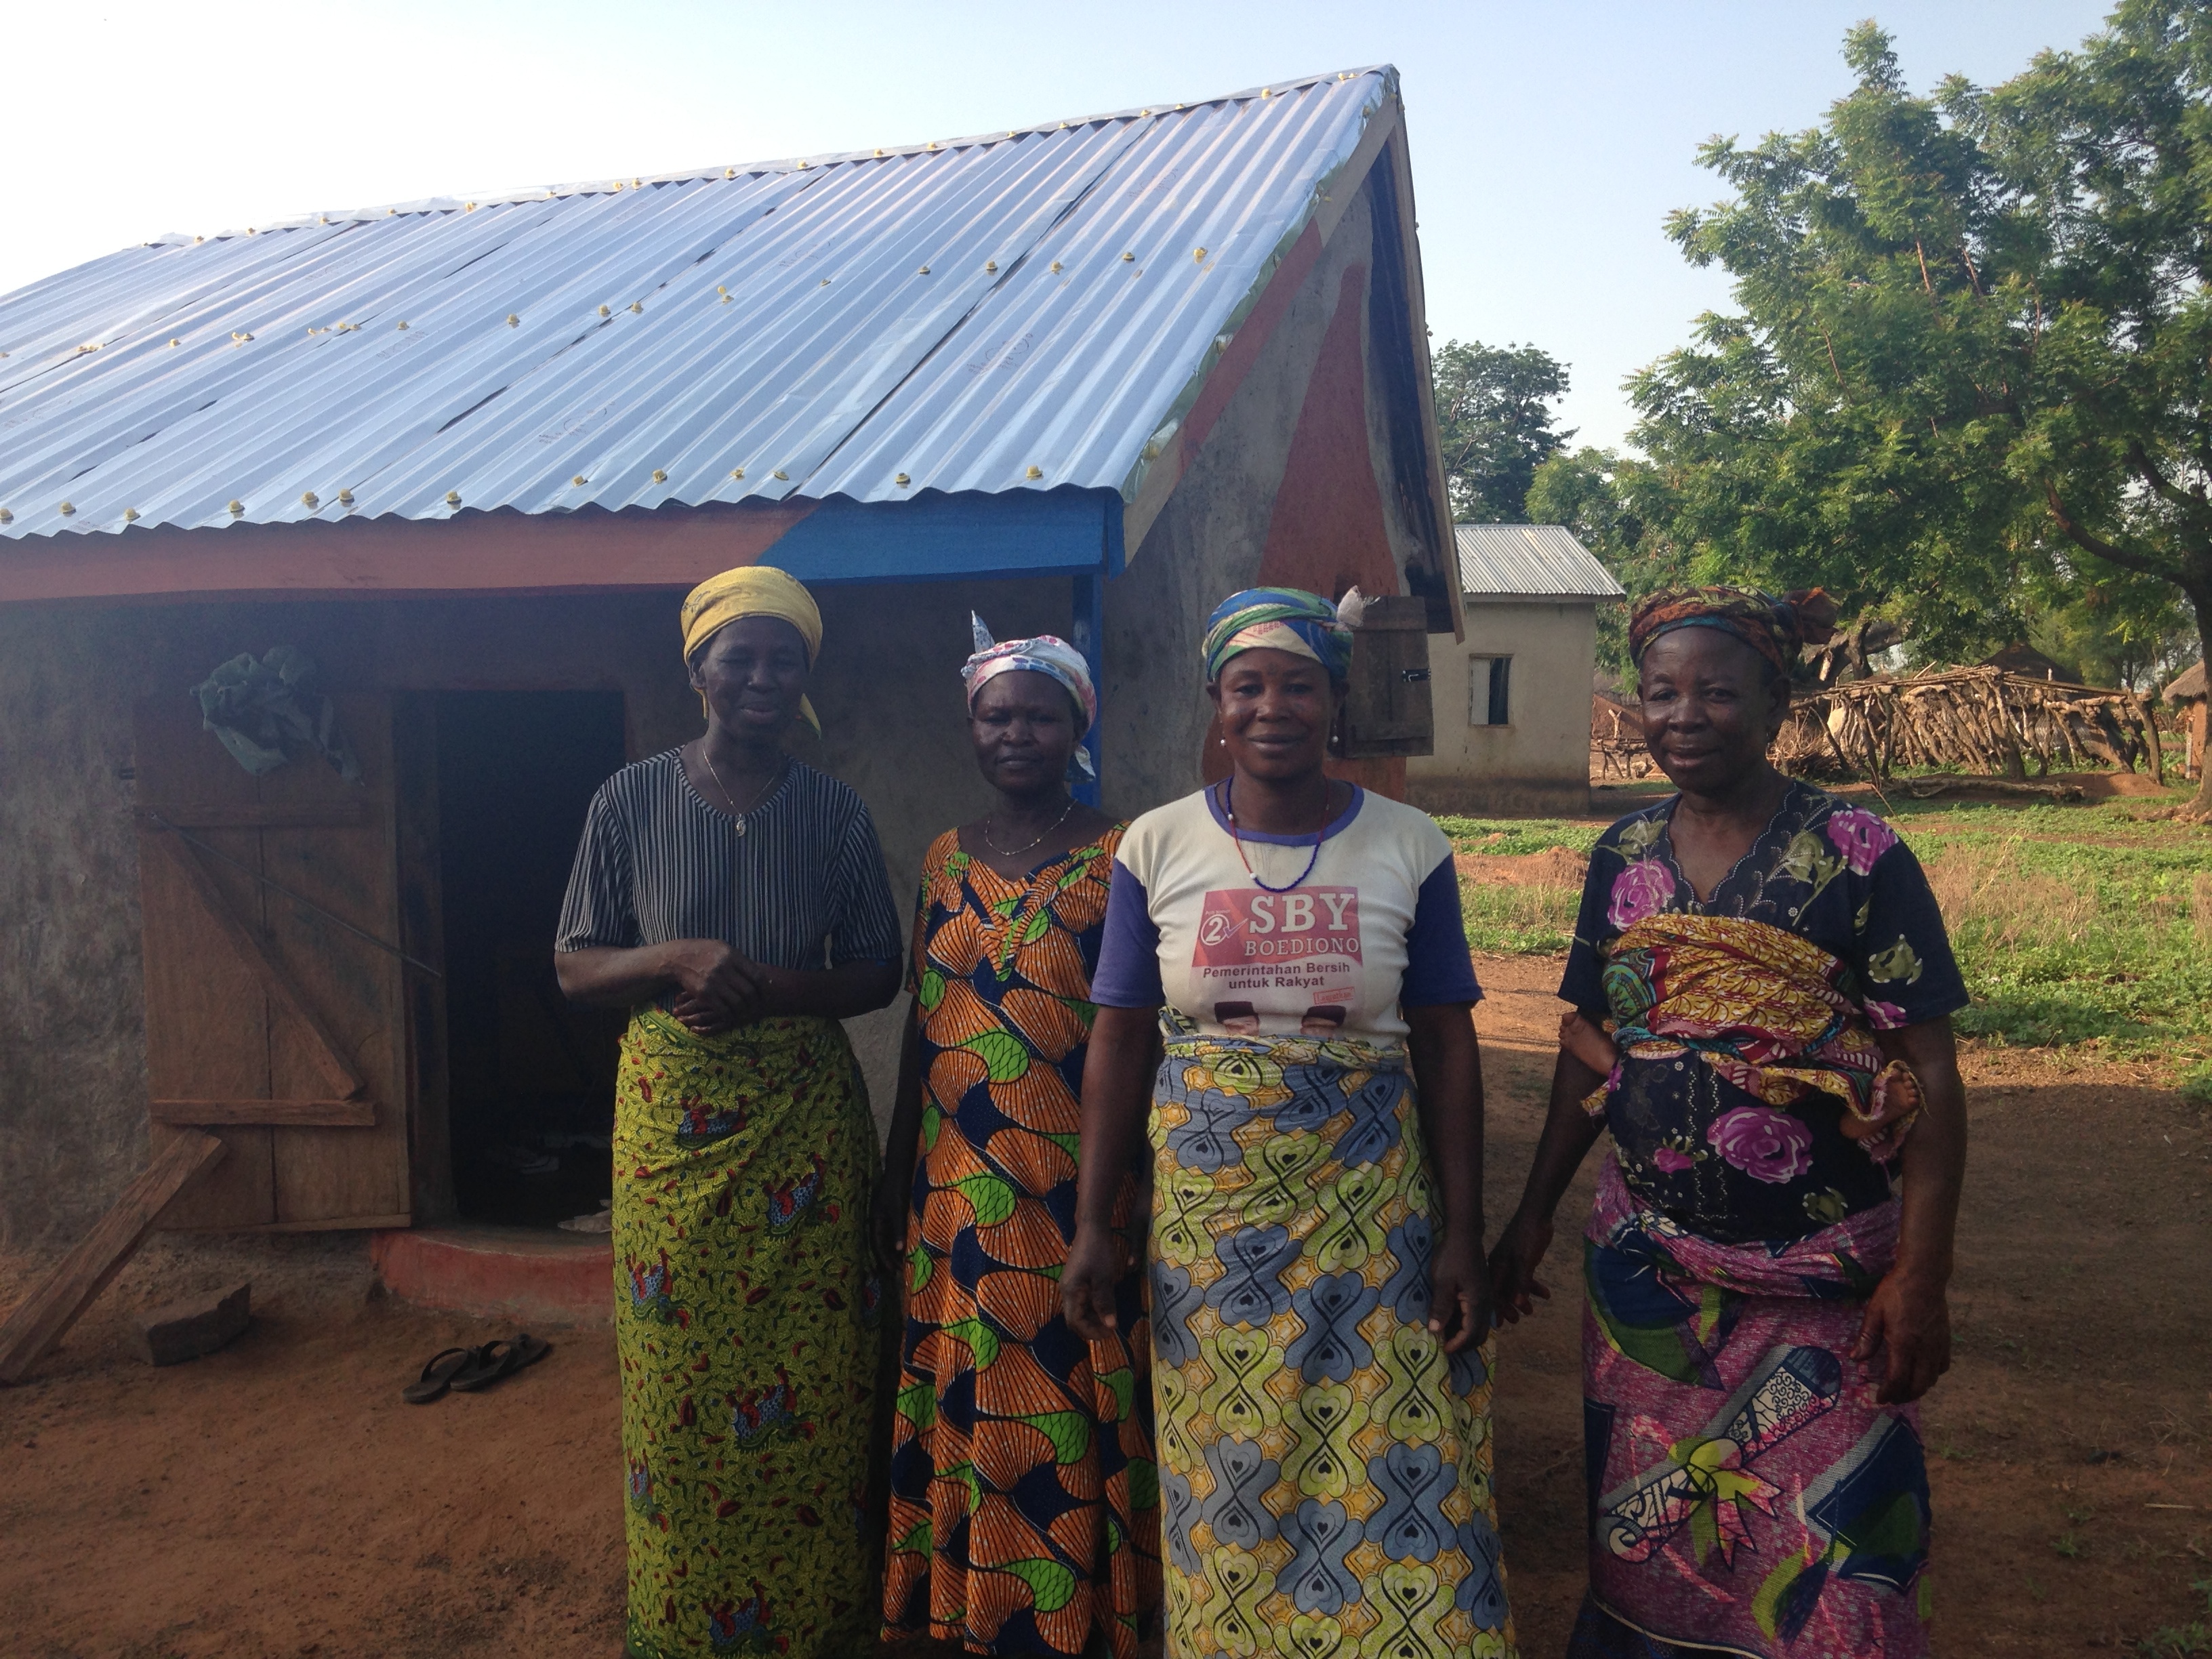 Saramatu, Damu, Lydia and Fuseina posing by the solar business after their first week of sales